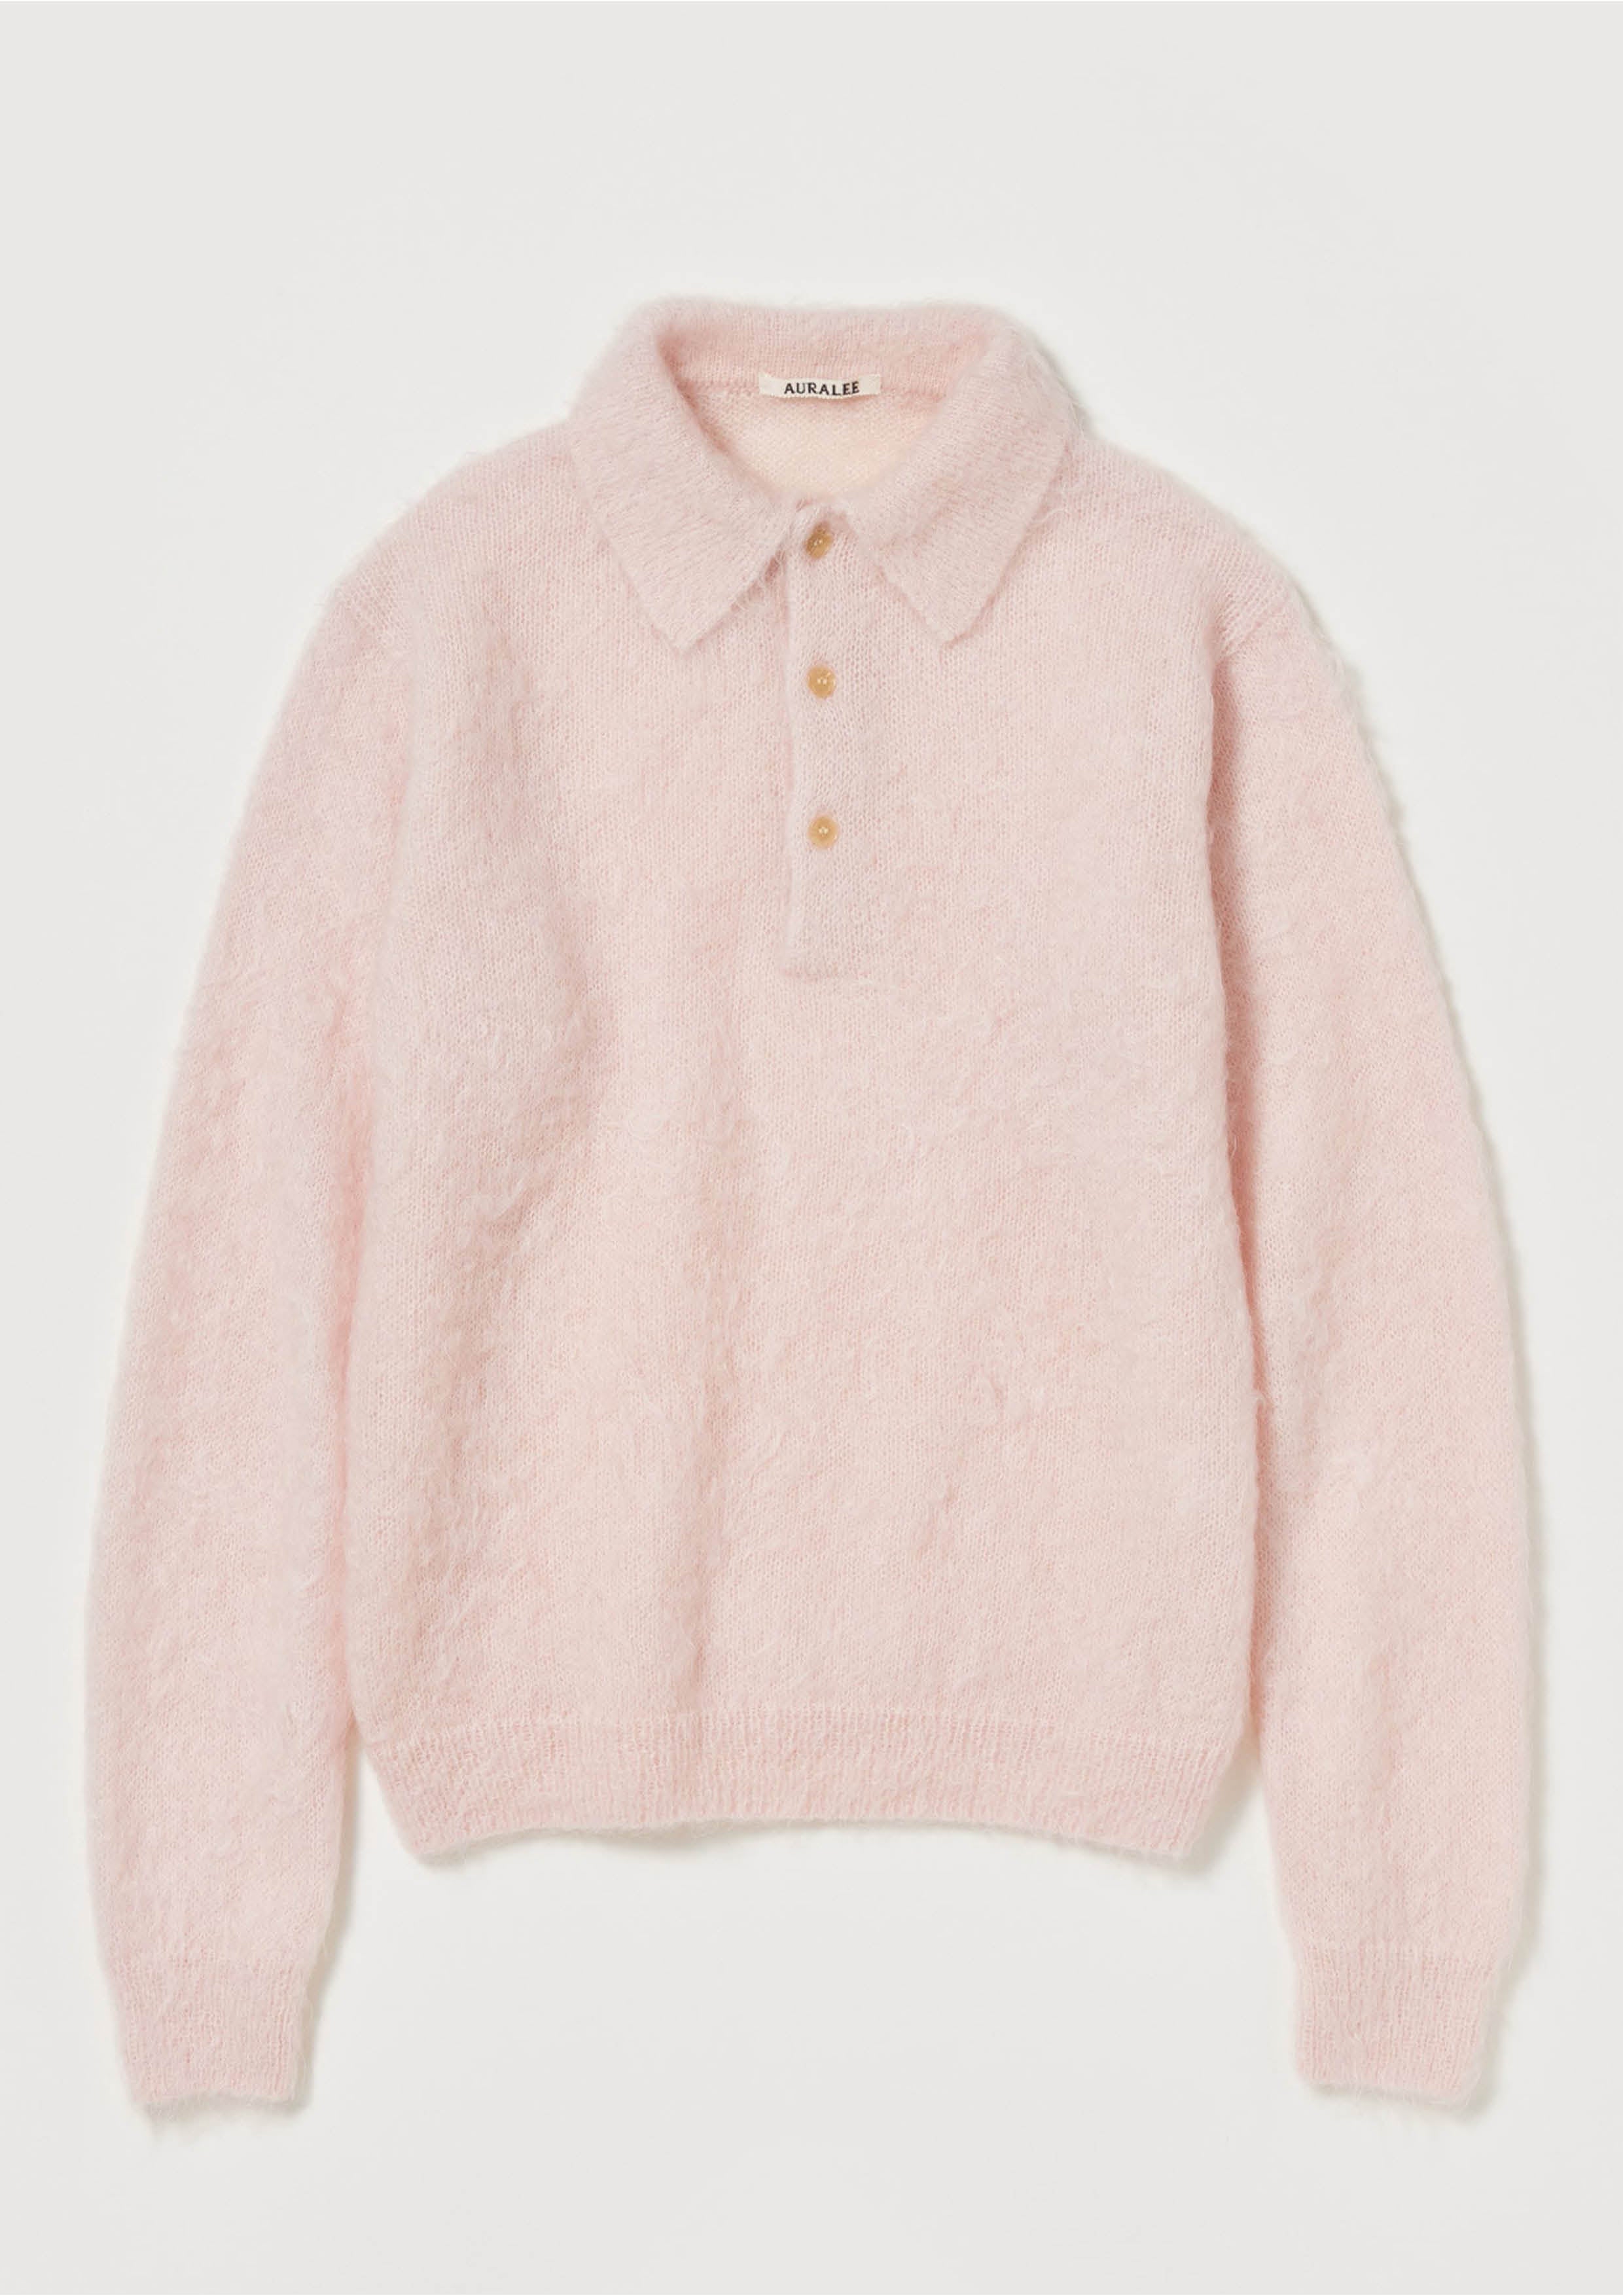 AURALEE - BRUSHED SUPER KID MOHAIR KNIT POLO - LIGHT PINK – SOLAR MTP